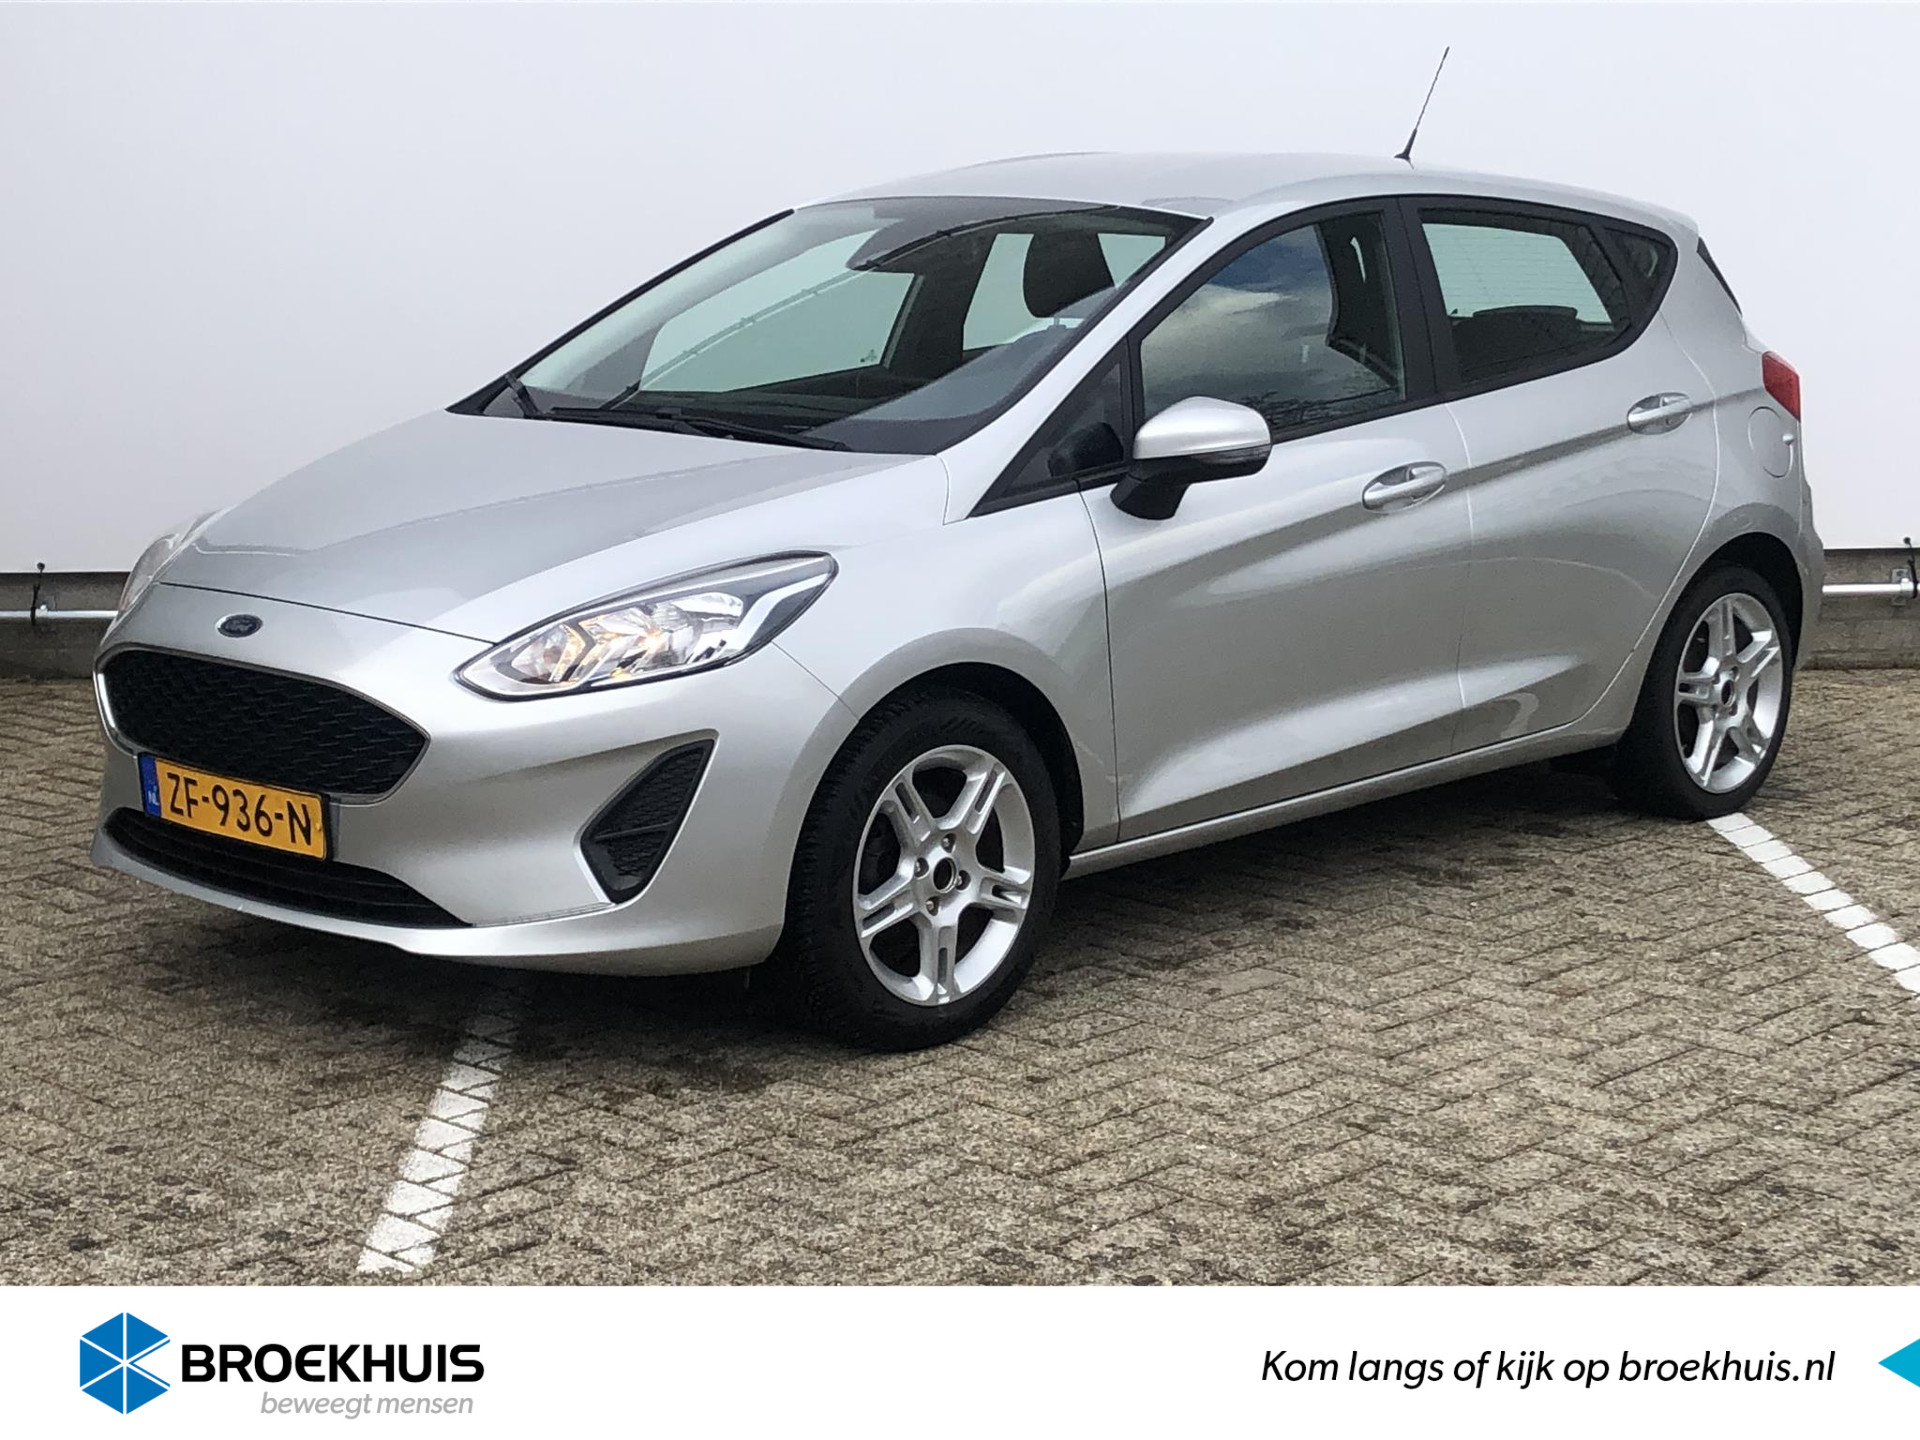 Ford Fiesta 1.1 85pk Trend l Navigatie l Apple Carplay/Android Auto l Airconditioning l Cruise control bij viaBOVAG.nl